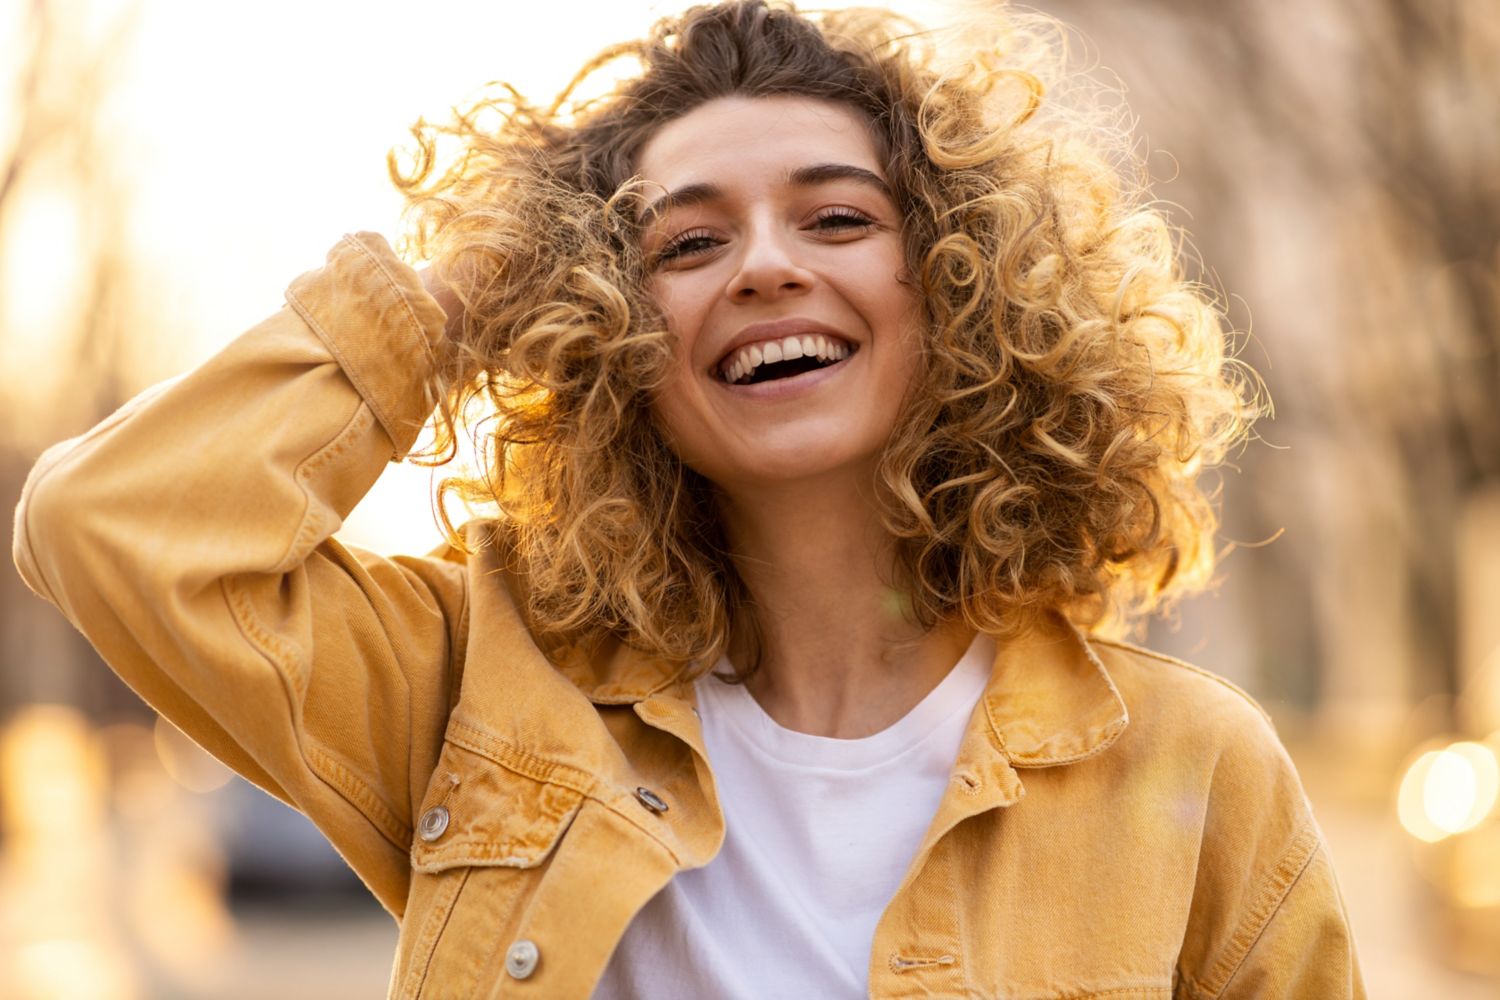 Young smiling woman with curly hair